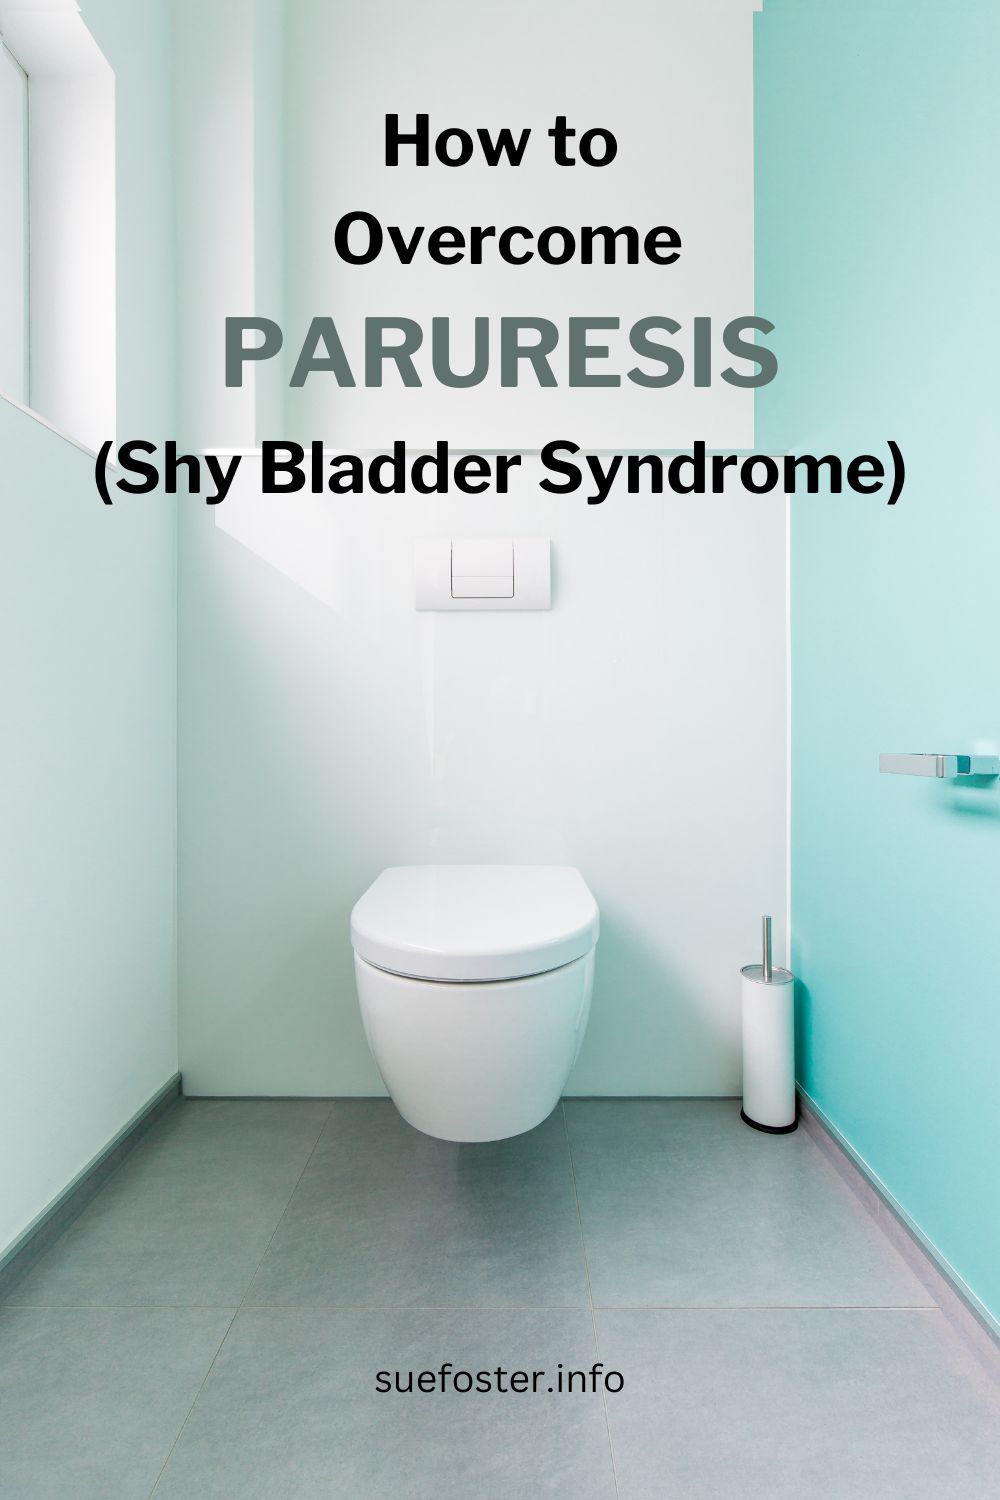 Struggling with shy bladder syndrome? Discover effective strategies to overcome paruresis and regain control of your life in this blog post.